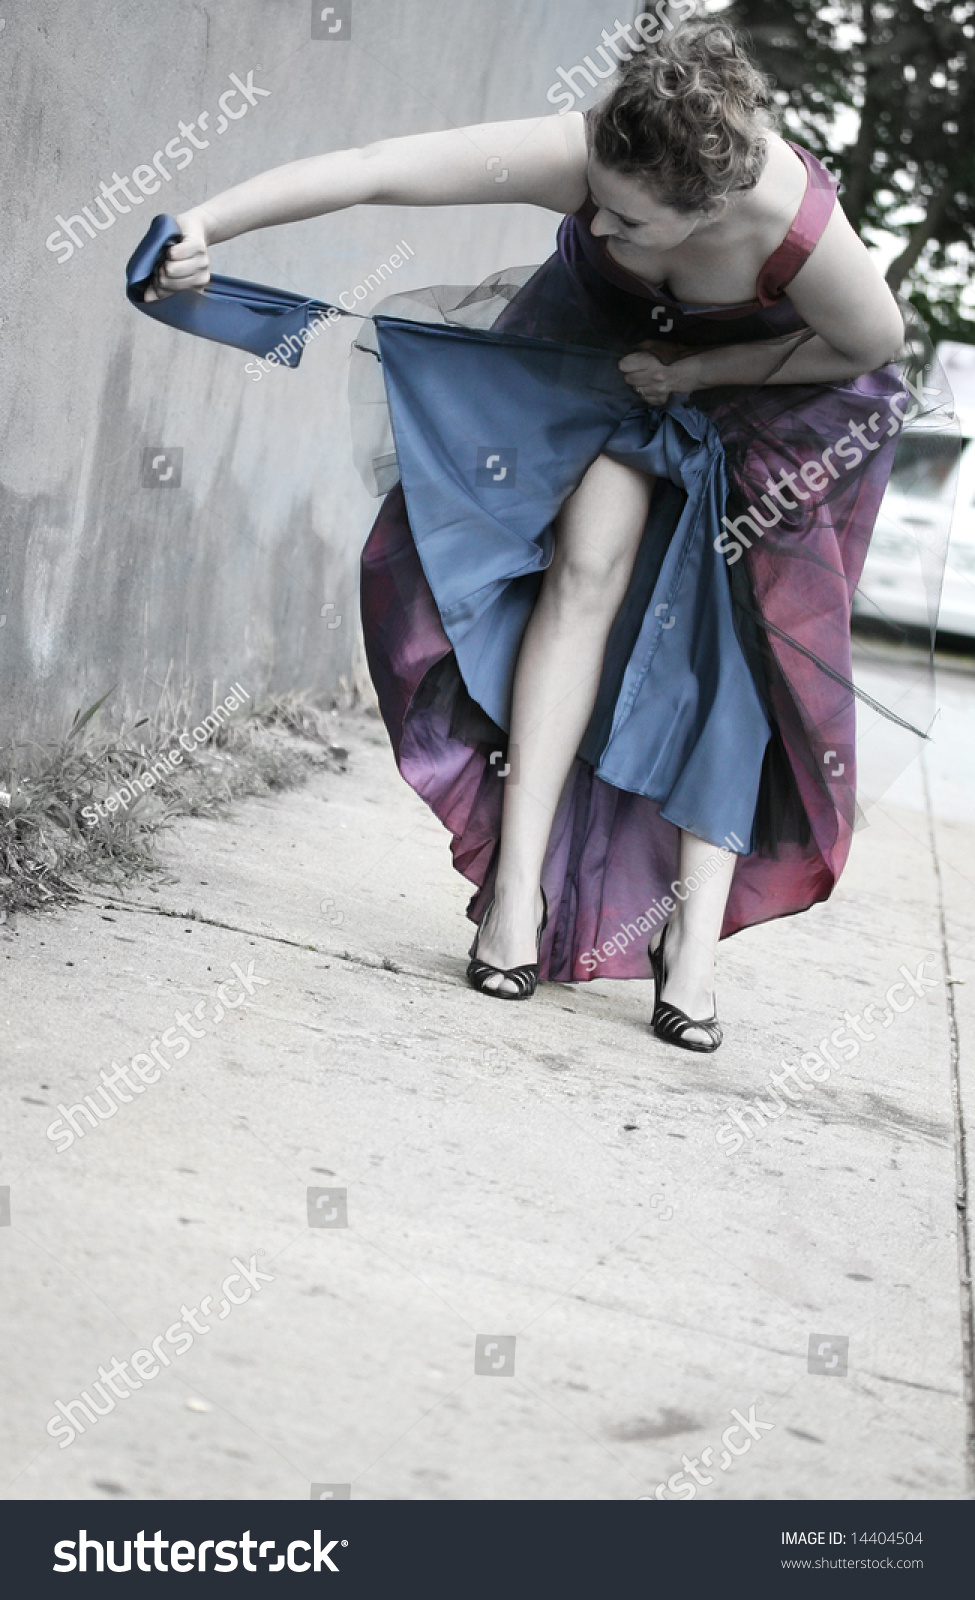 Woman Ripping Her Evening Gown On Foto De Stock 14404504 Shutterstock 9906